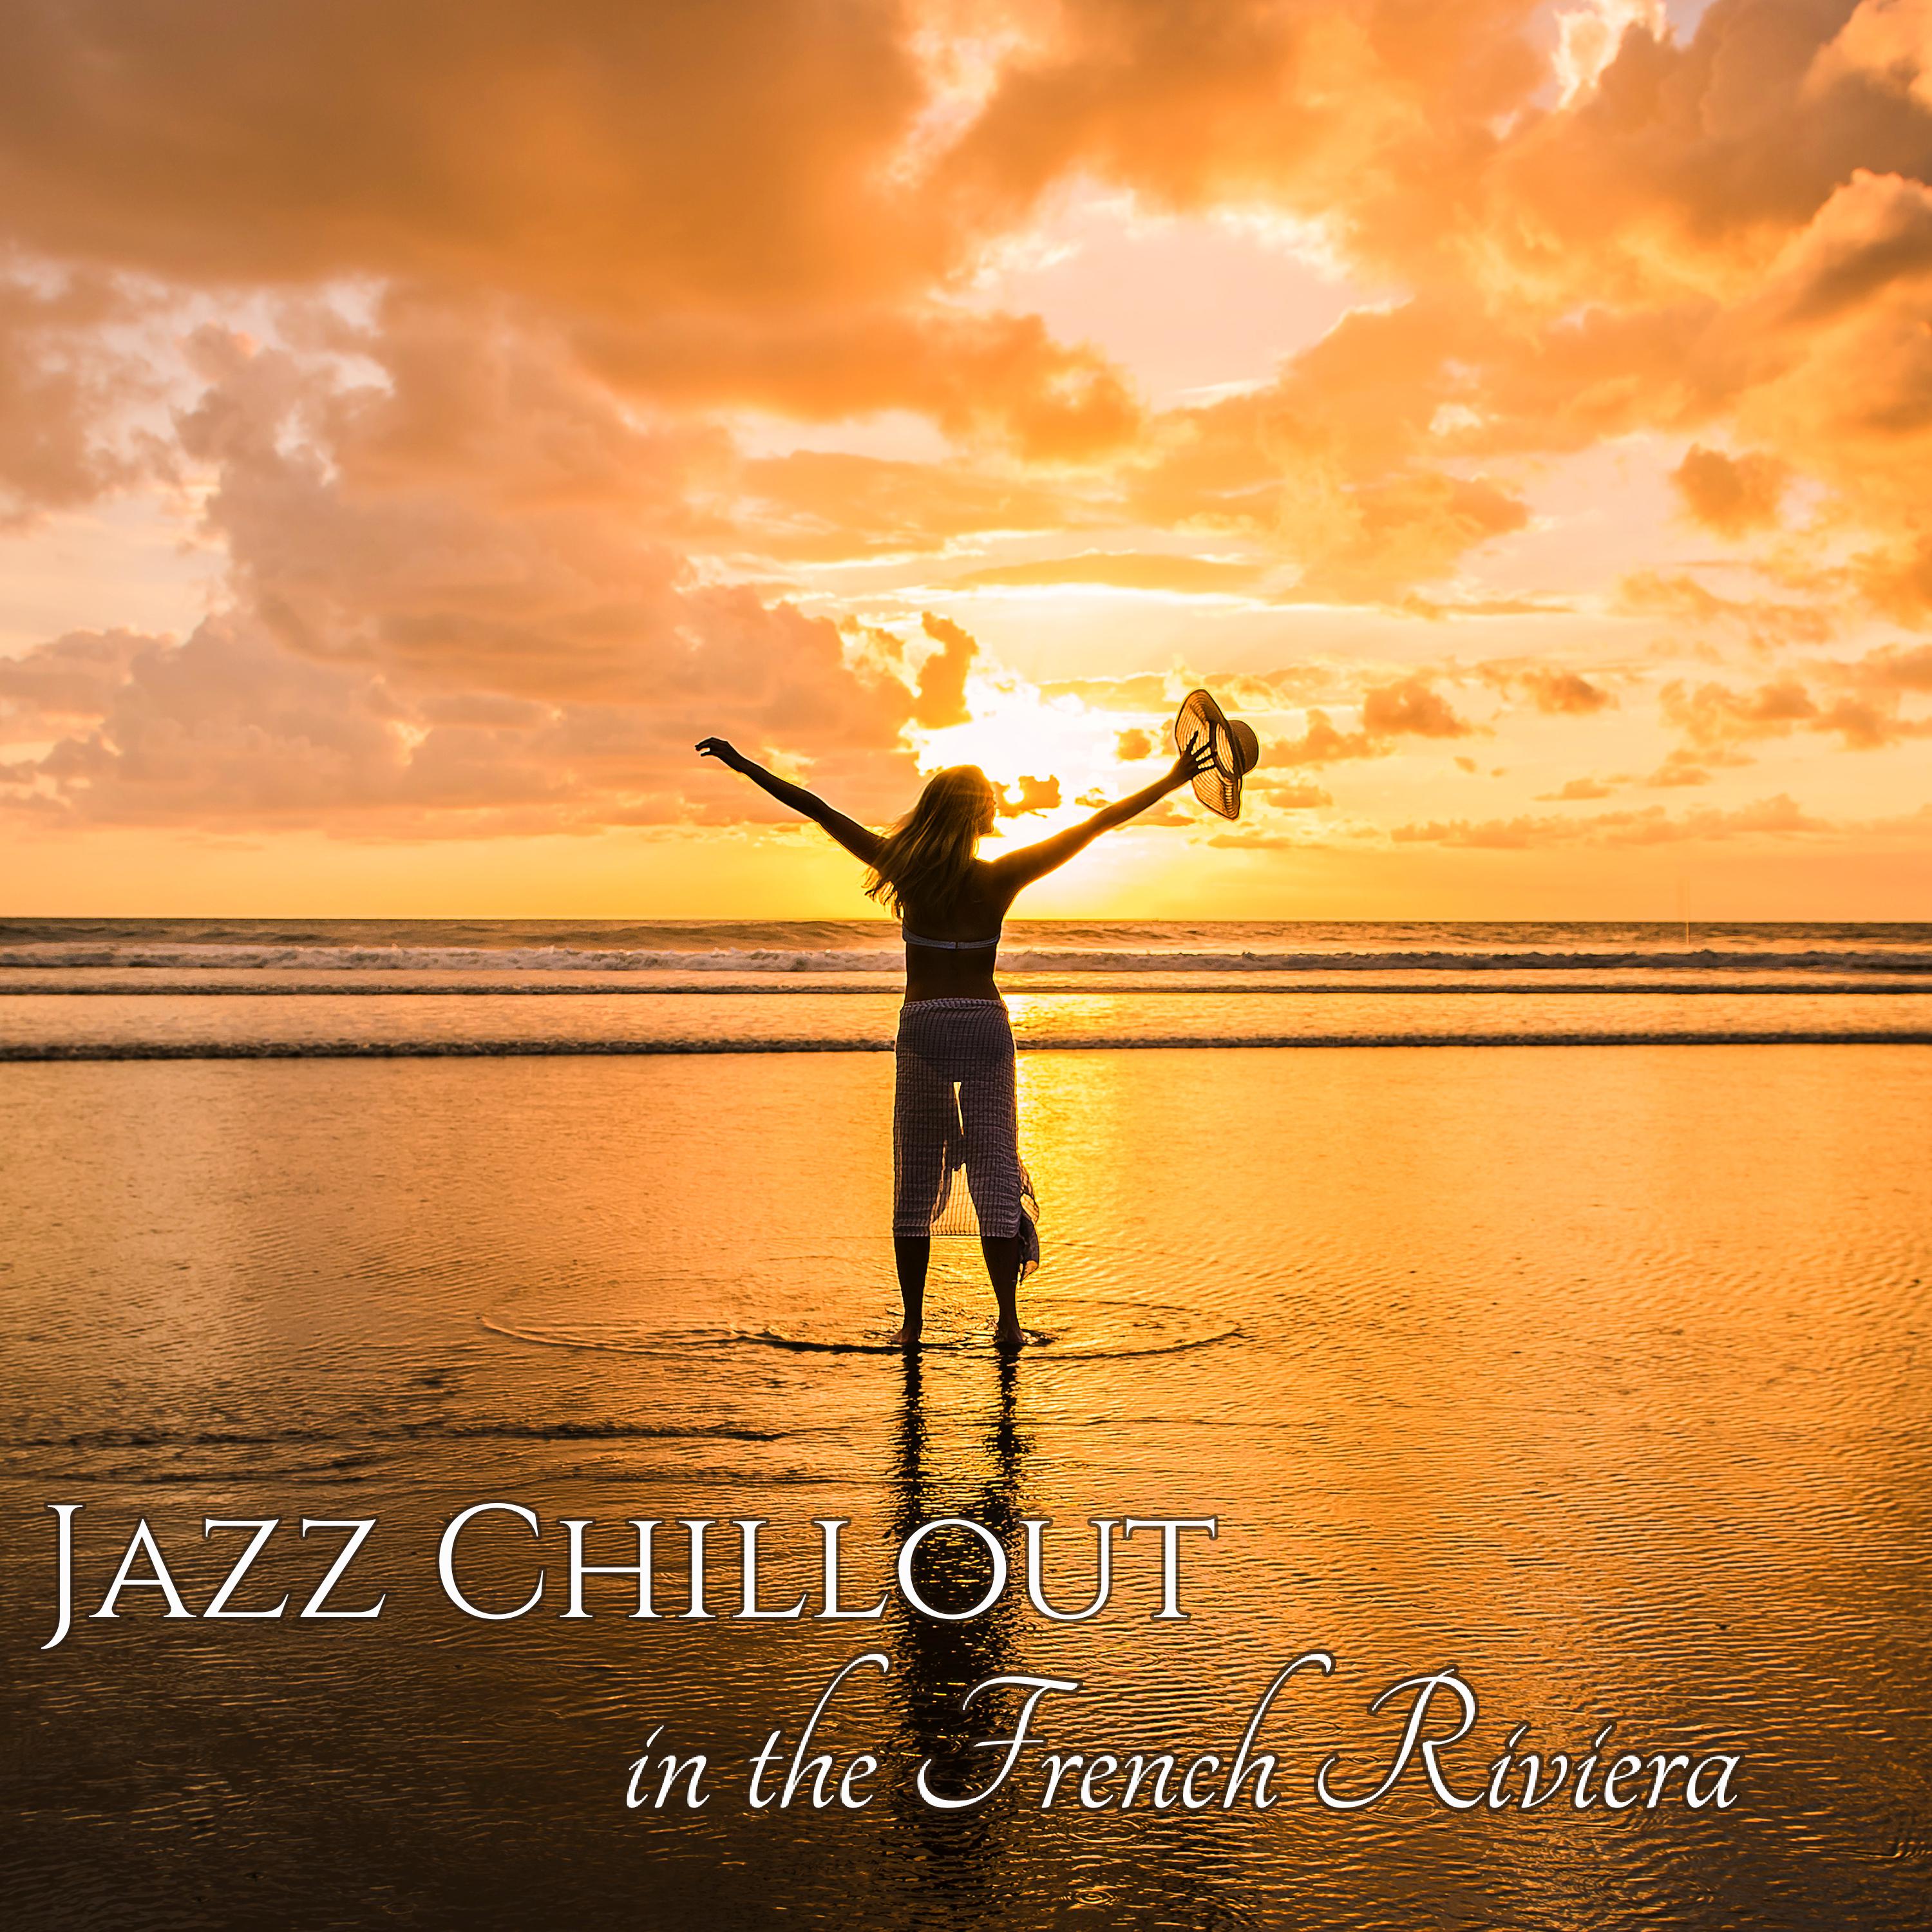 Licence to Jazz - Jazz Chillout